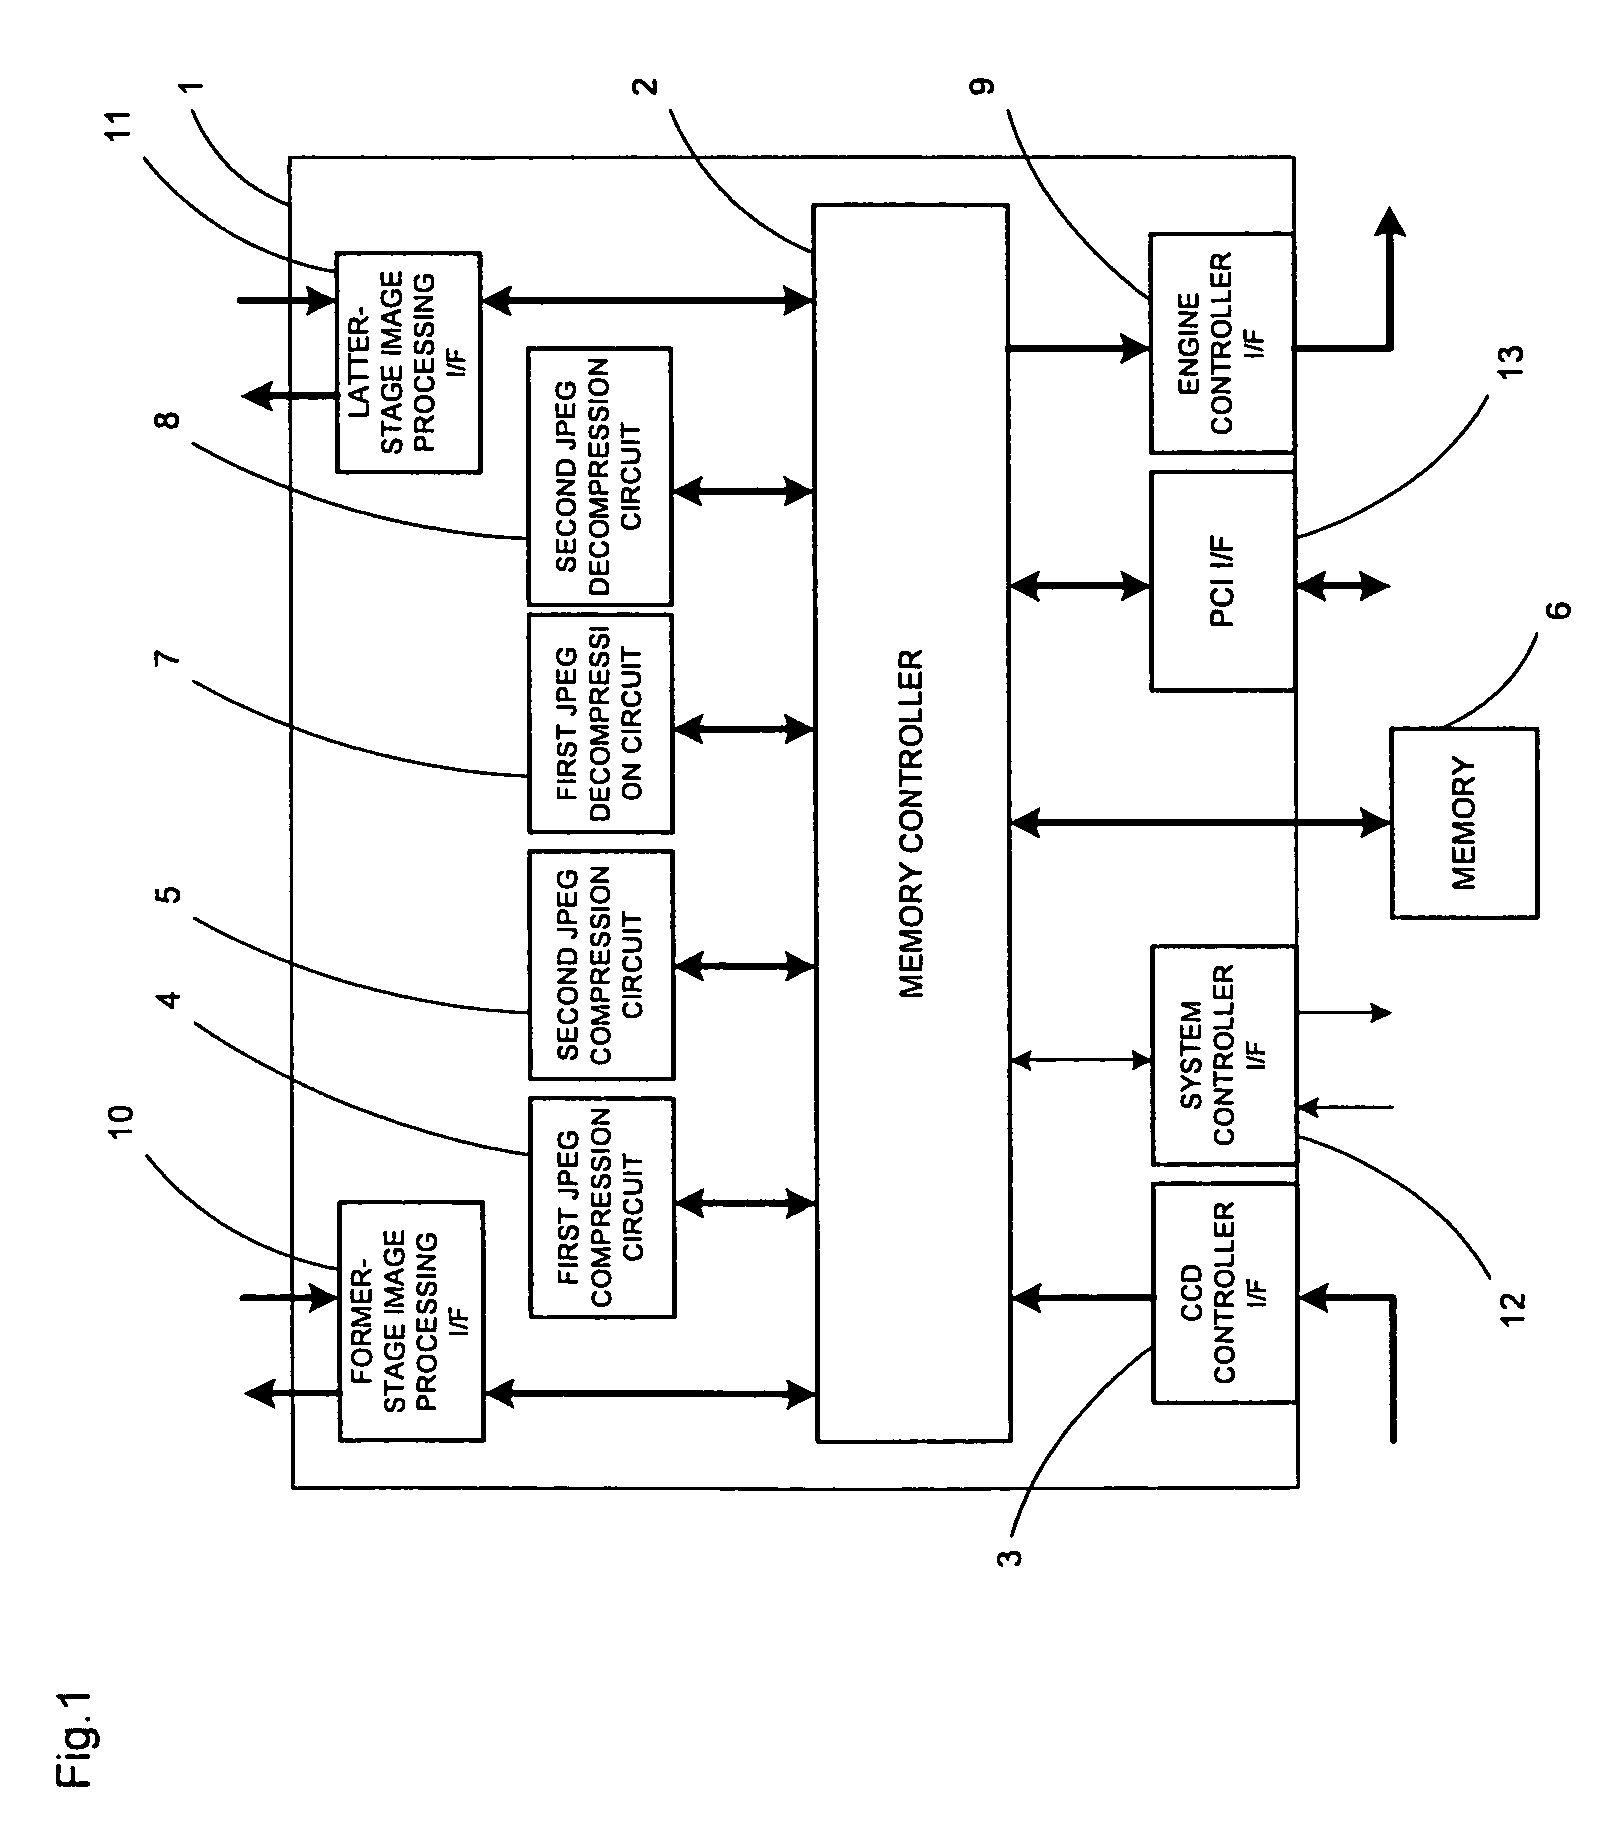 Image data processing circuit and image processing apparatus including transfer control section for selective operation of transfer section